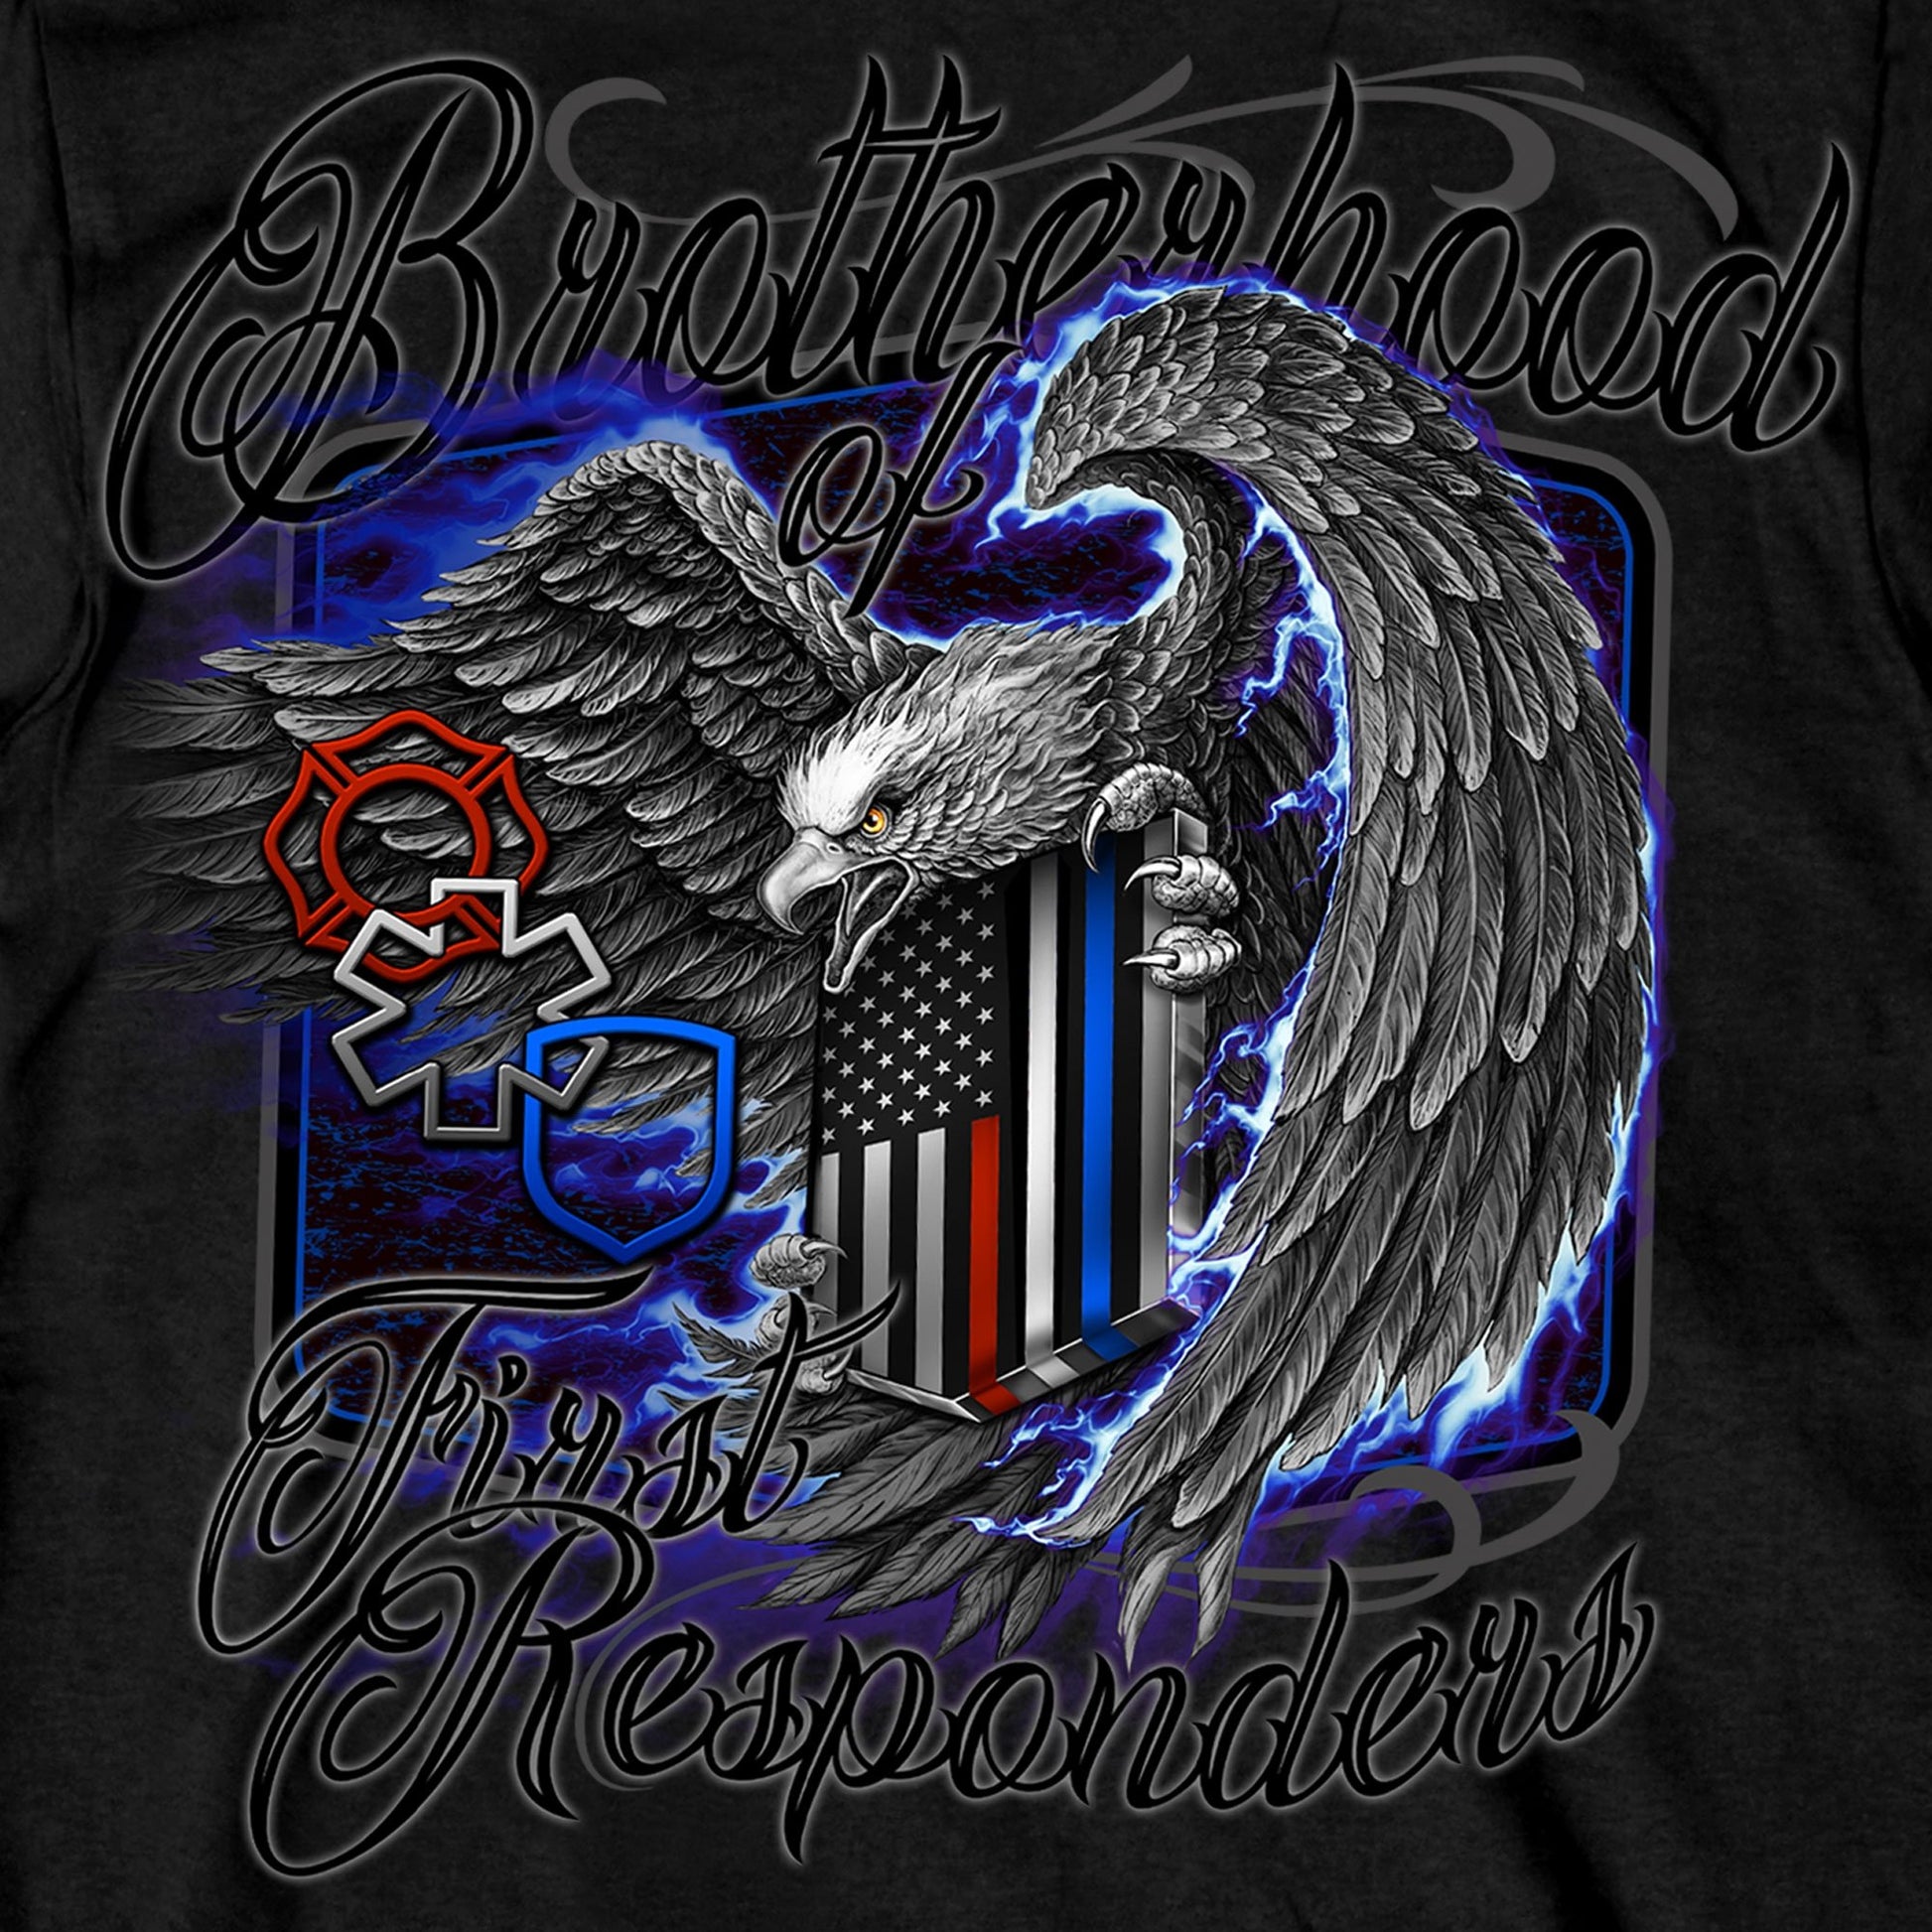 Hot Leathers GMD1451 Men's 'Brotherhood of First Responders Eagle' Black T-Shirt